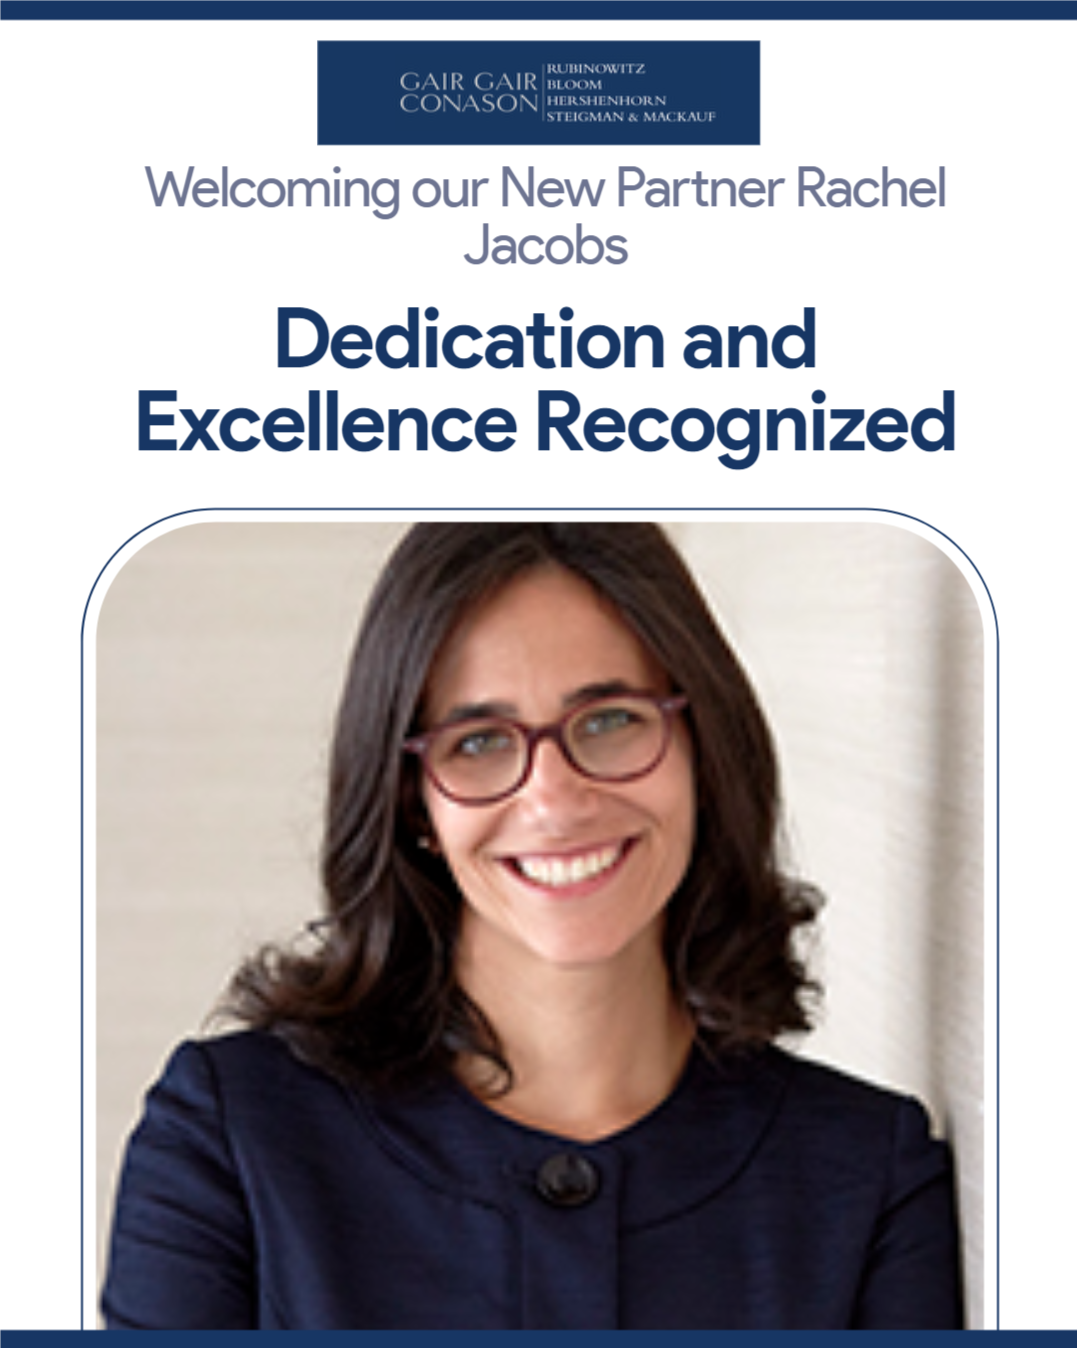 Personal Injury Attorney Rachel Jacobs was promoted partner